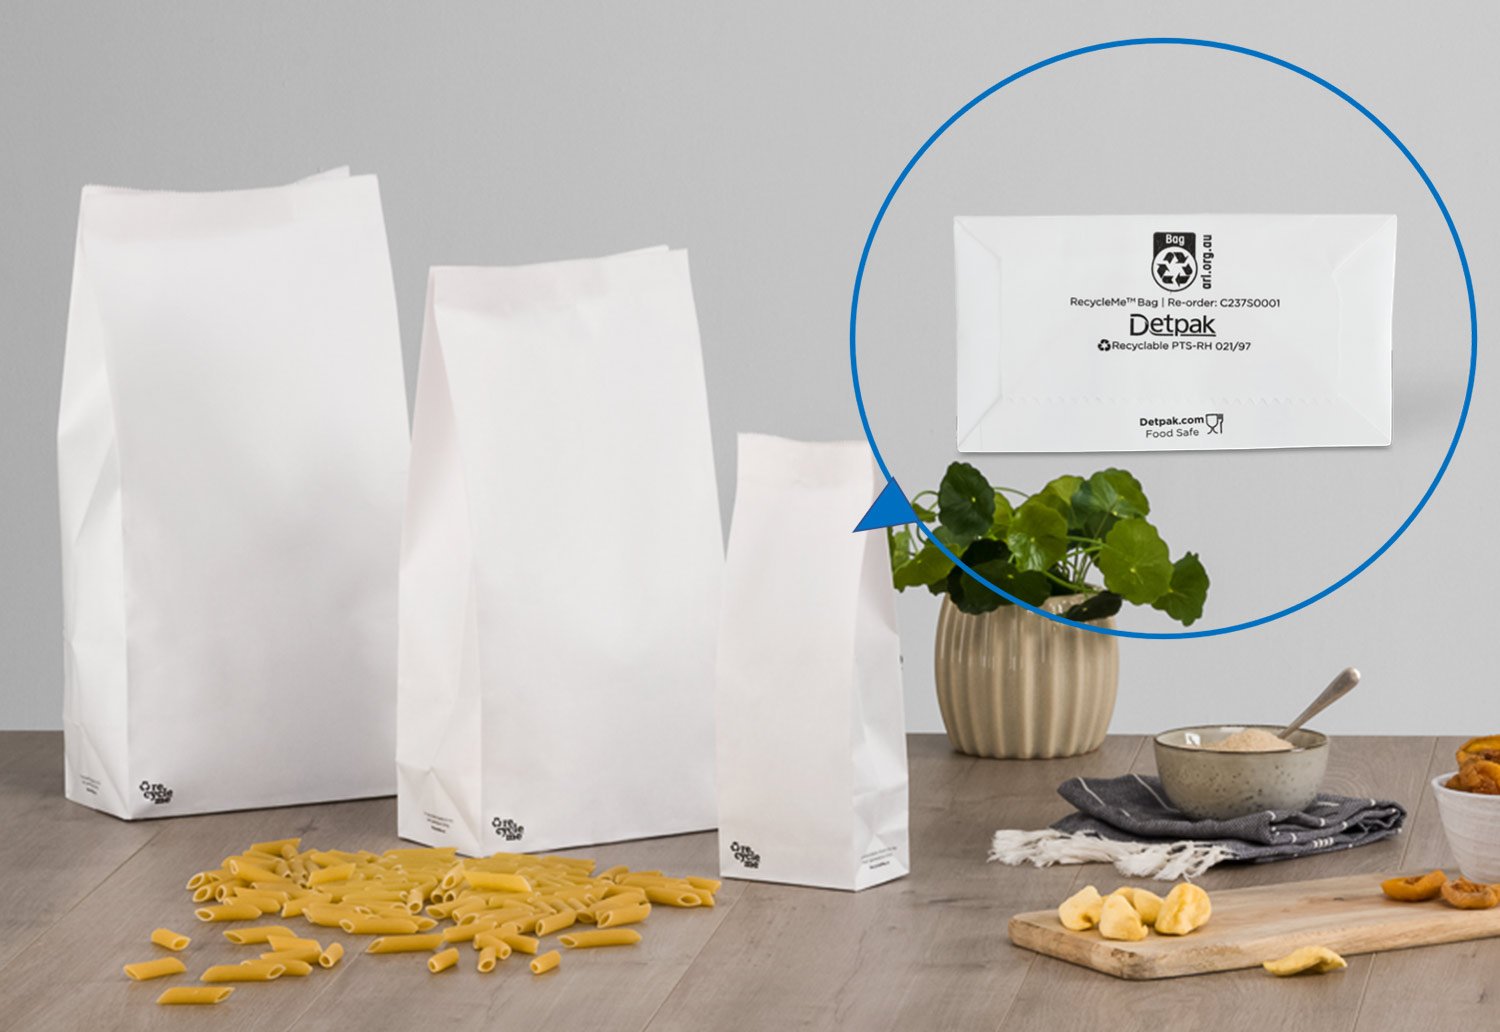 Image of RecycleMe bags filled with pasta and showing the Australasian Recycling Label